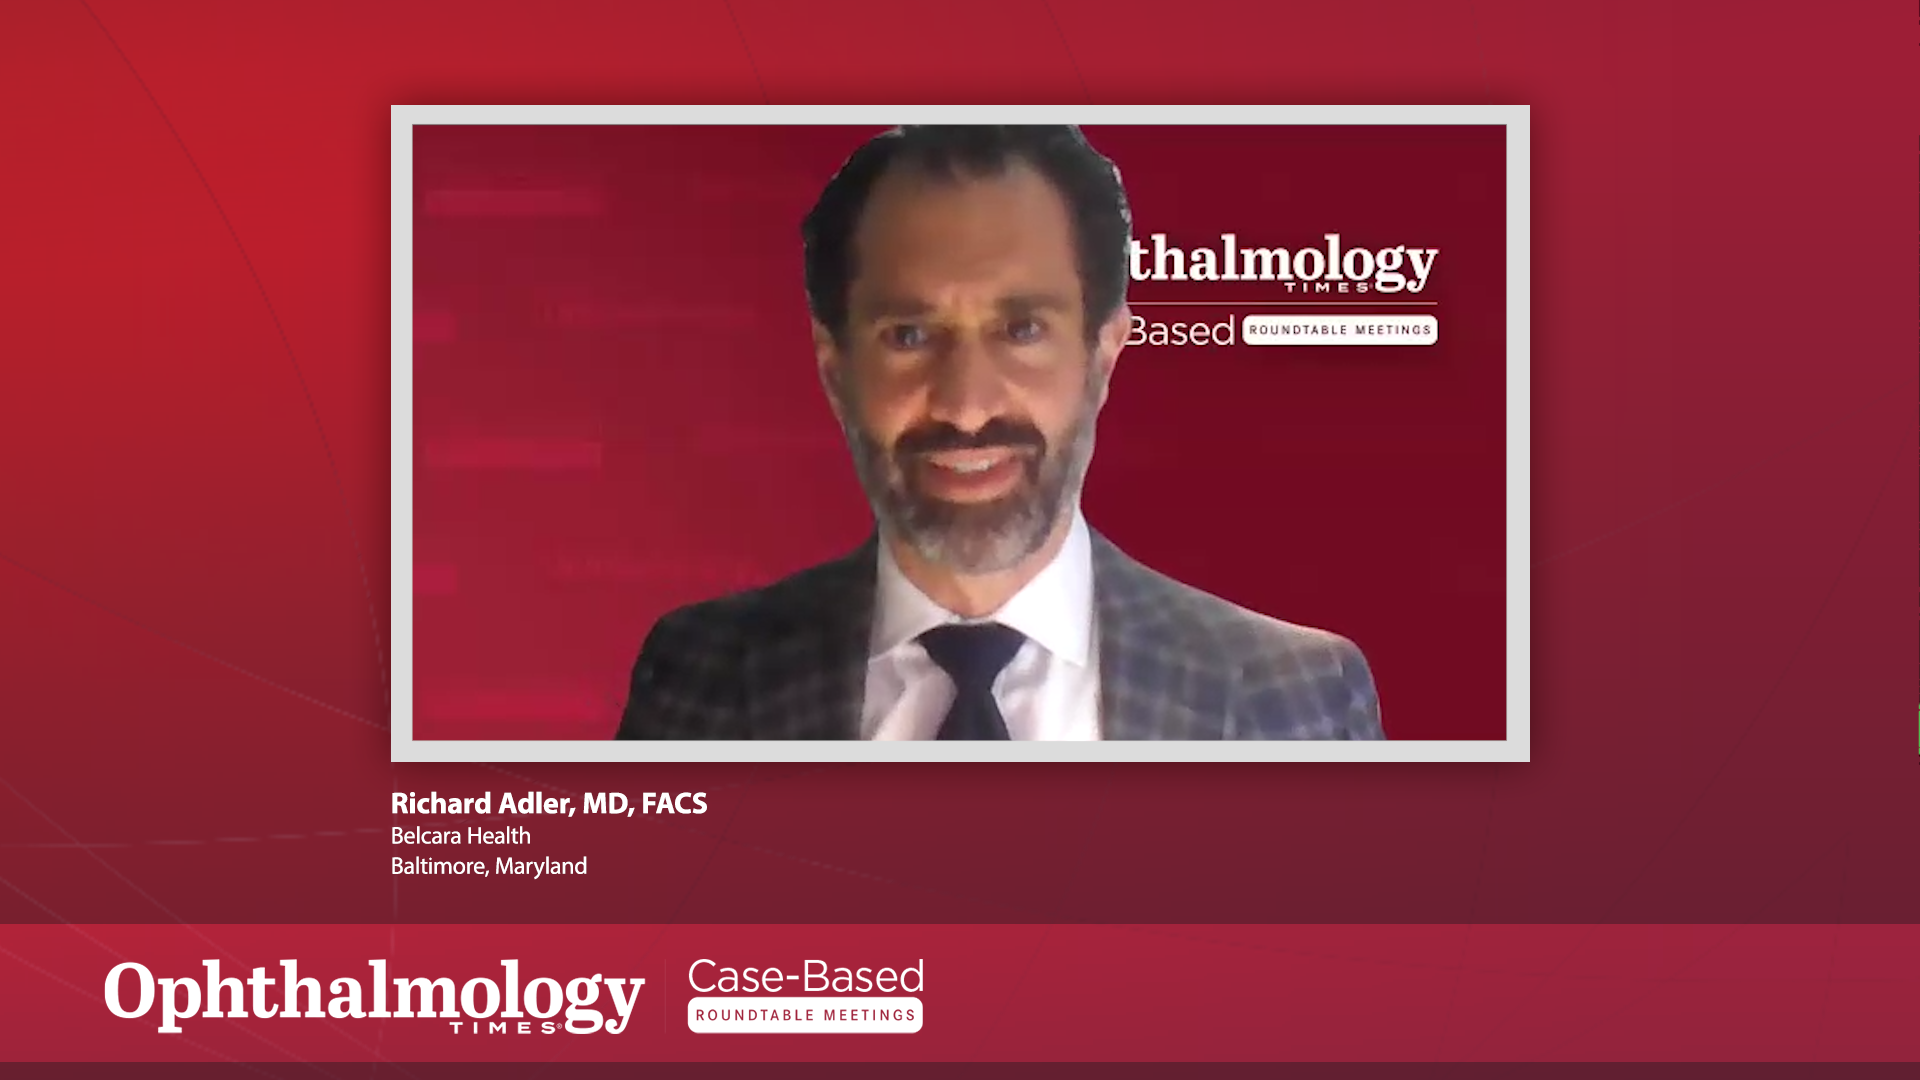 Video 3 - "Approaching Asymptomatic Cases with Risk Factors"